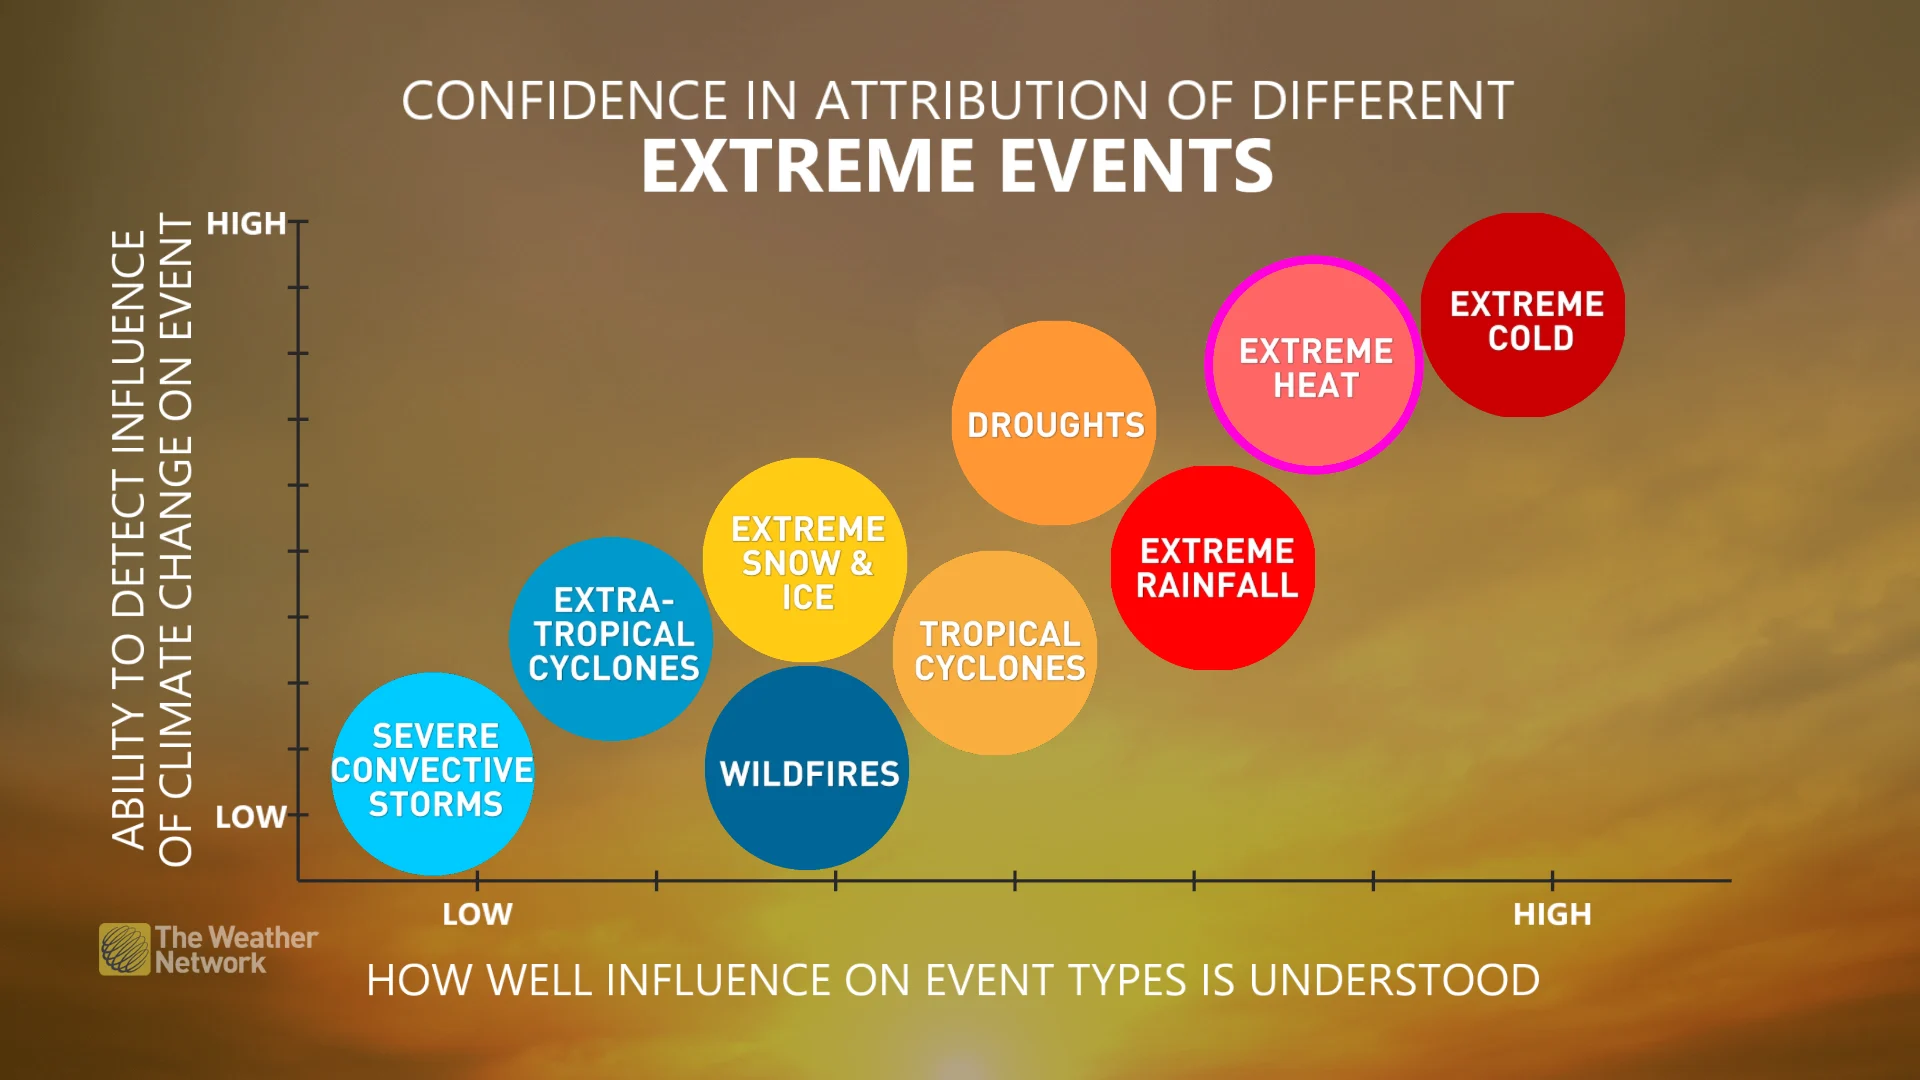 Explainer: Confidence in attribution of different extreme heat events